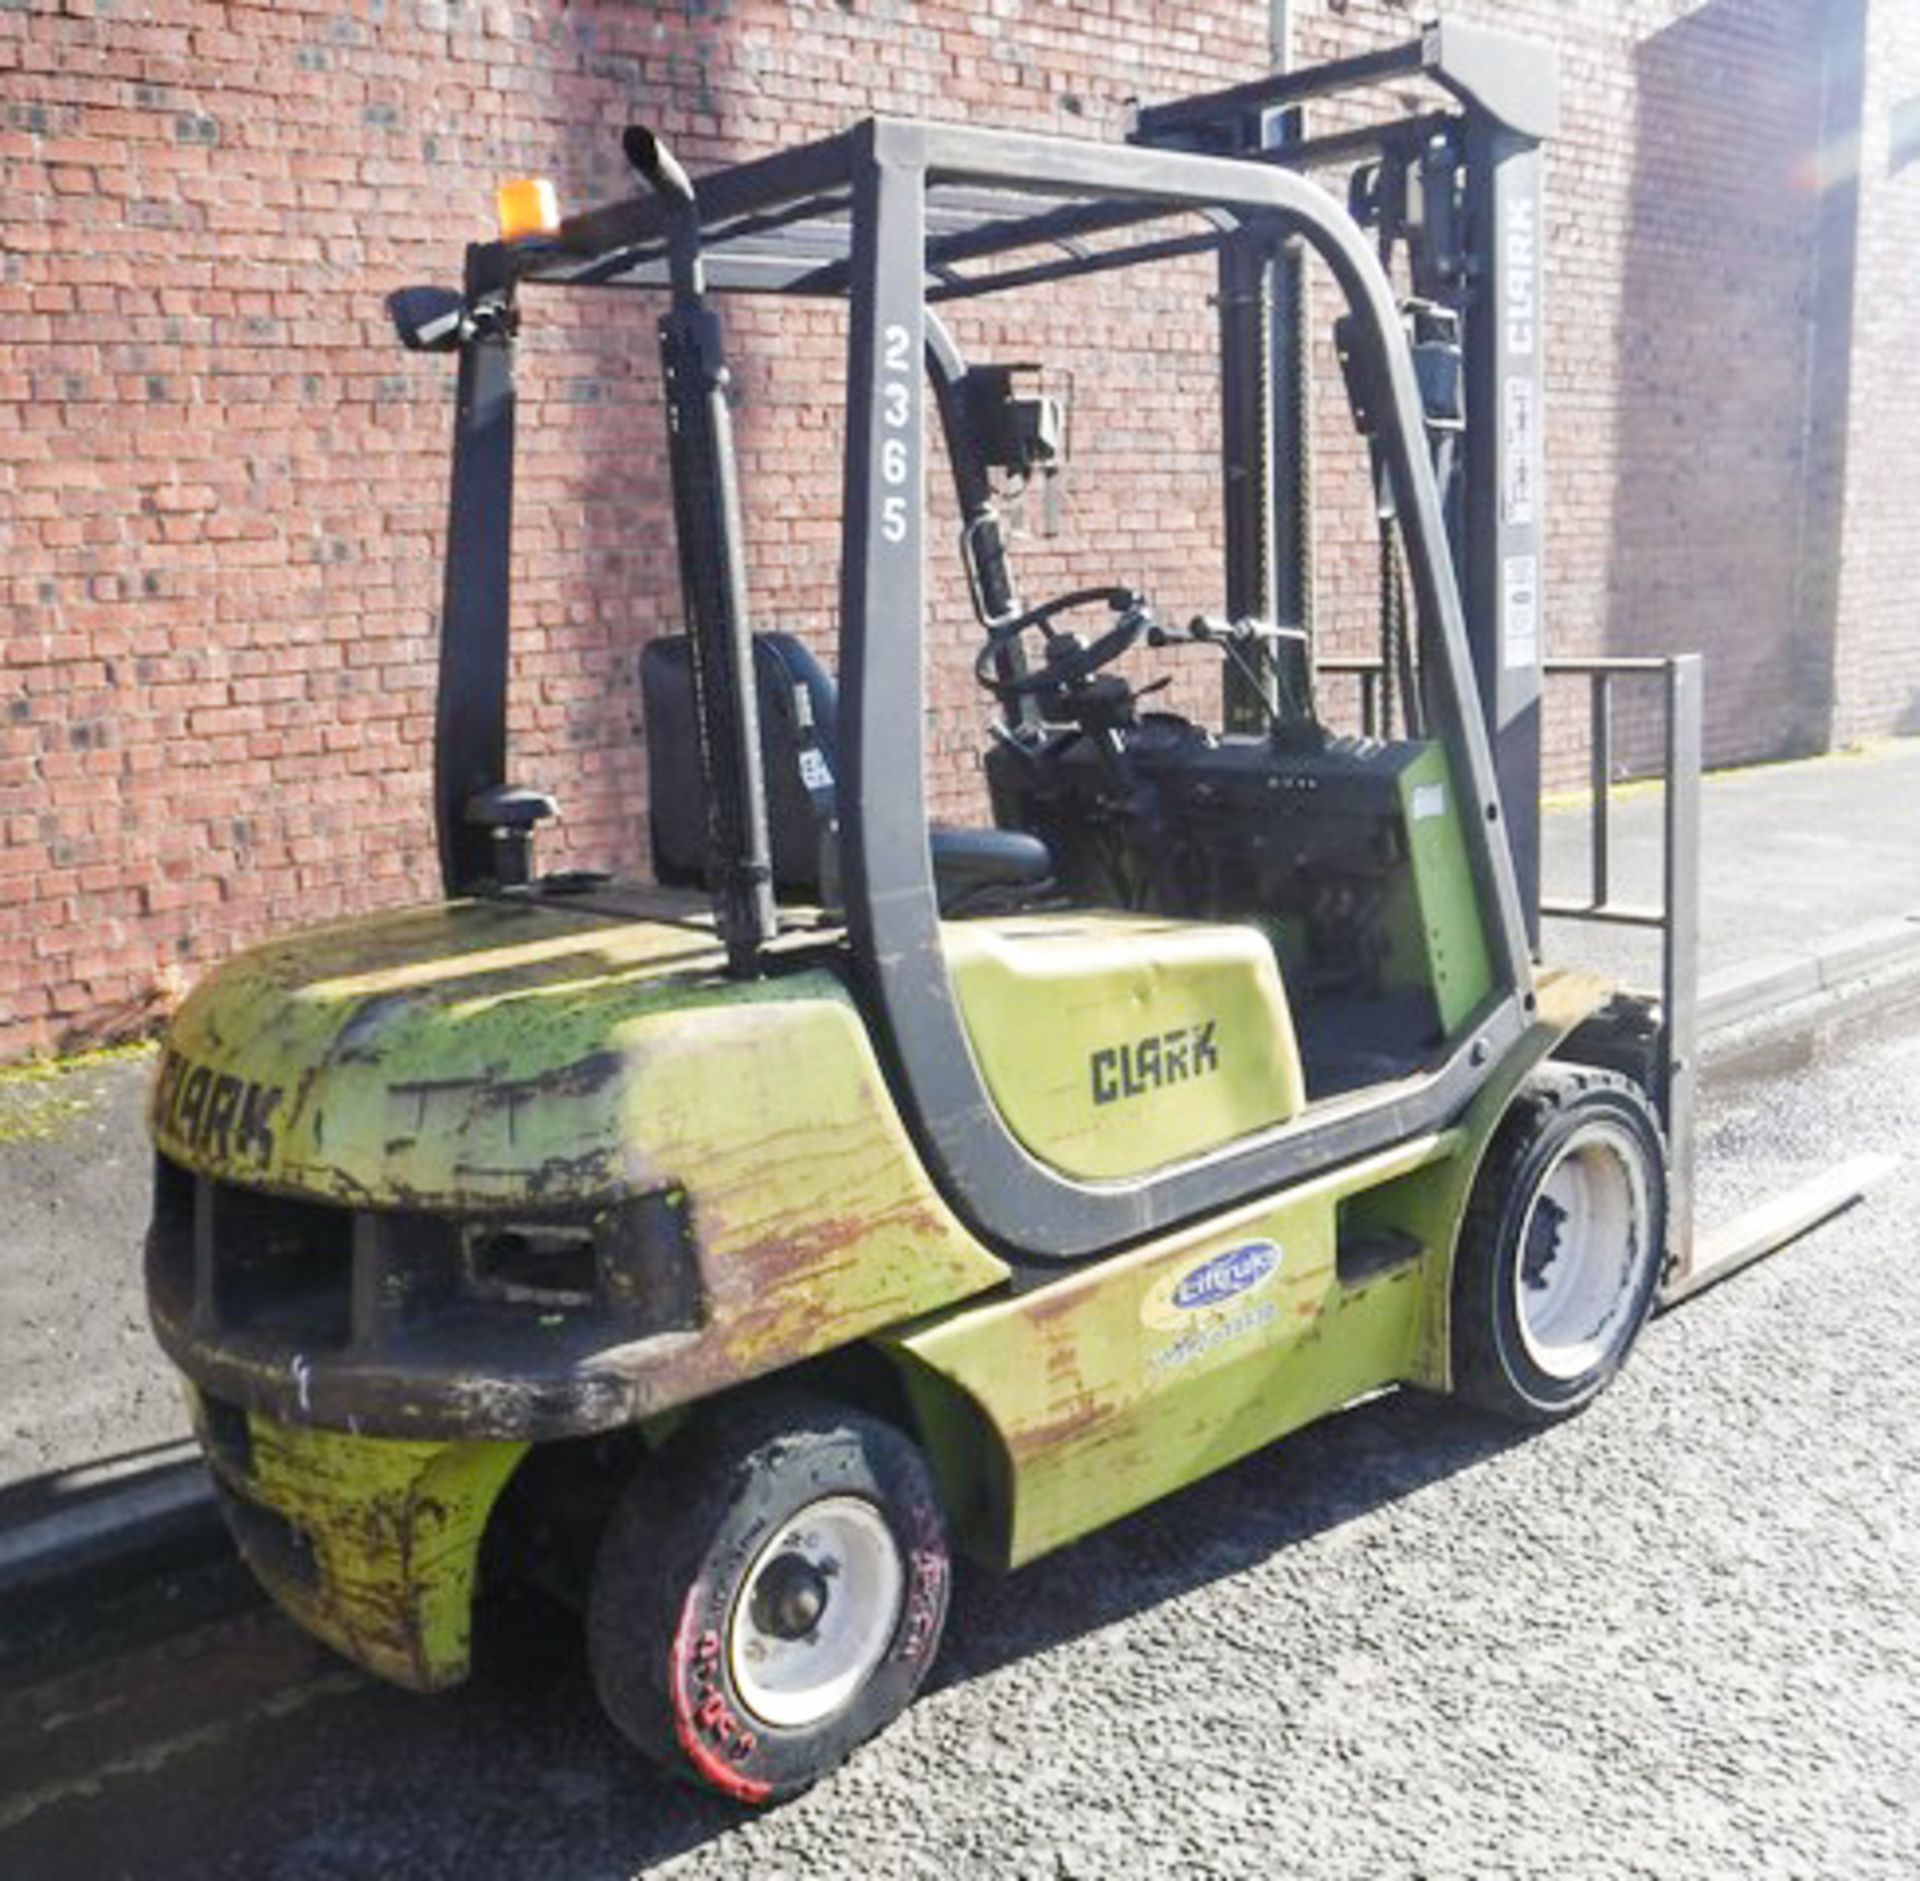 CLARKE 3 TON DIESEL FORKLIFT WITH SIDE SHIFT 7832HRS (NOT VERIFIED) - Image 10 of 16